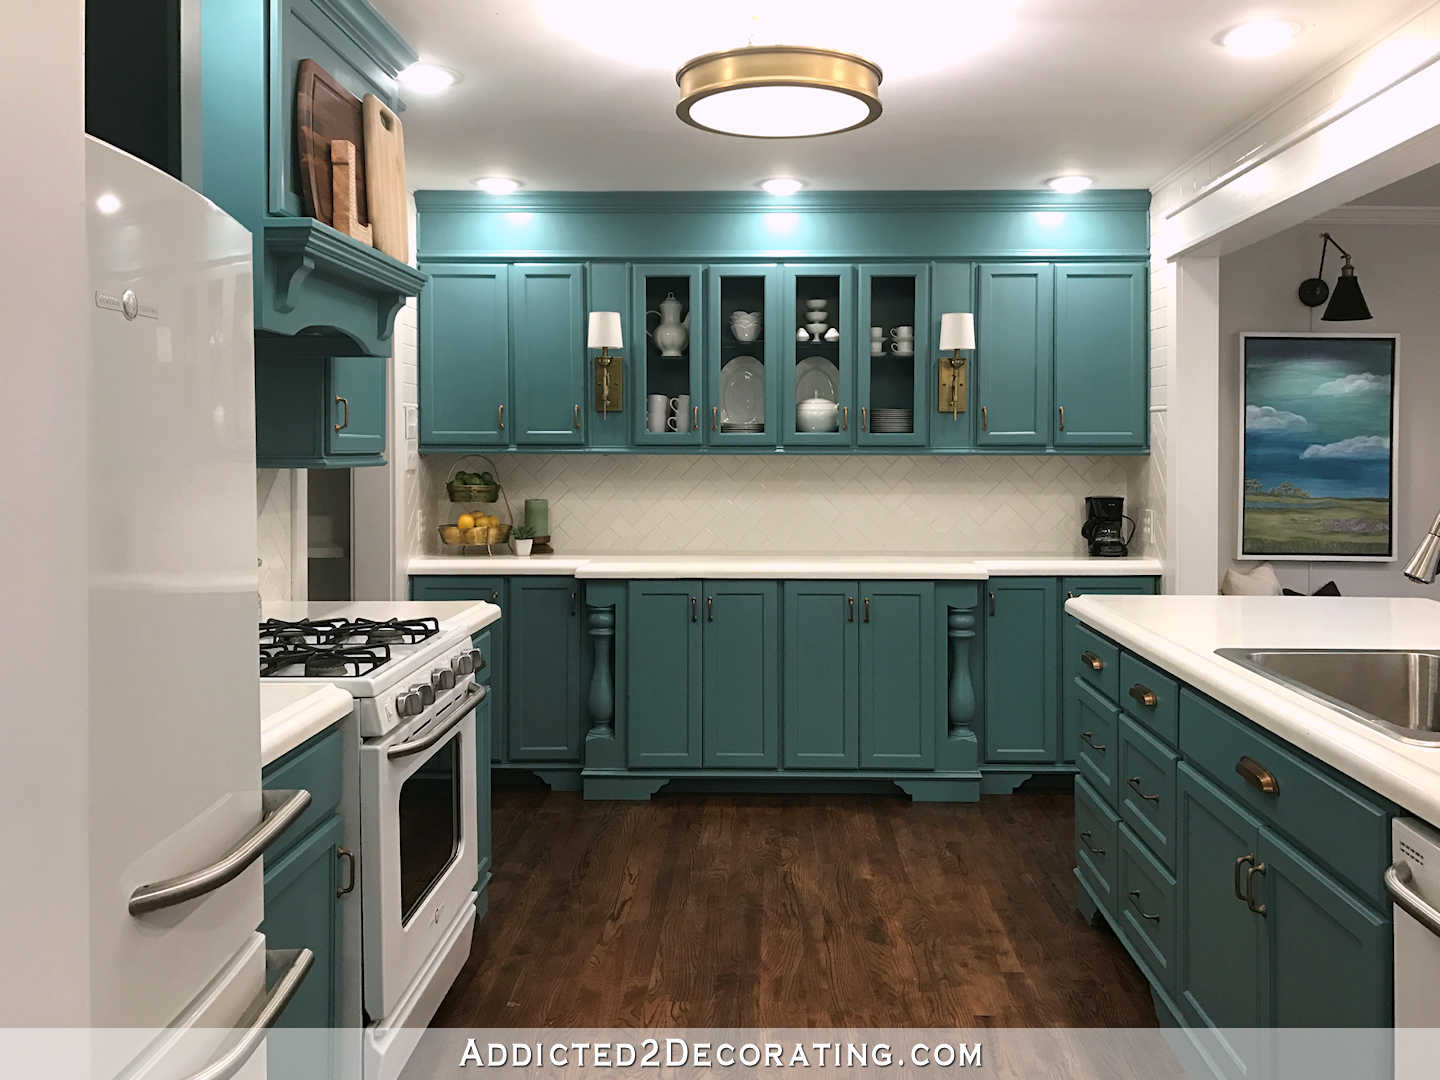 My FinishedForNow Kitchen From Kelly Green To Teal